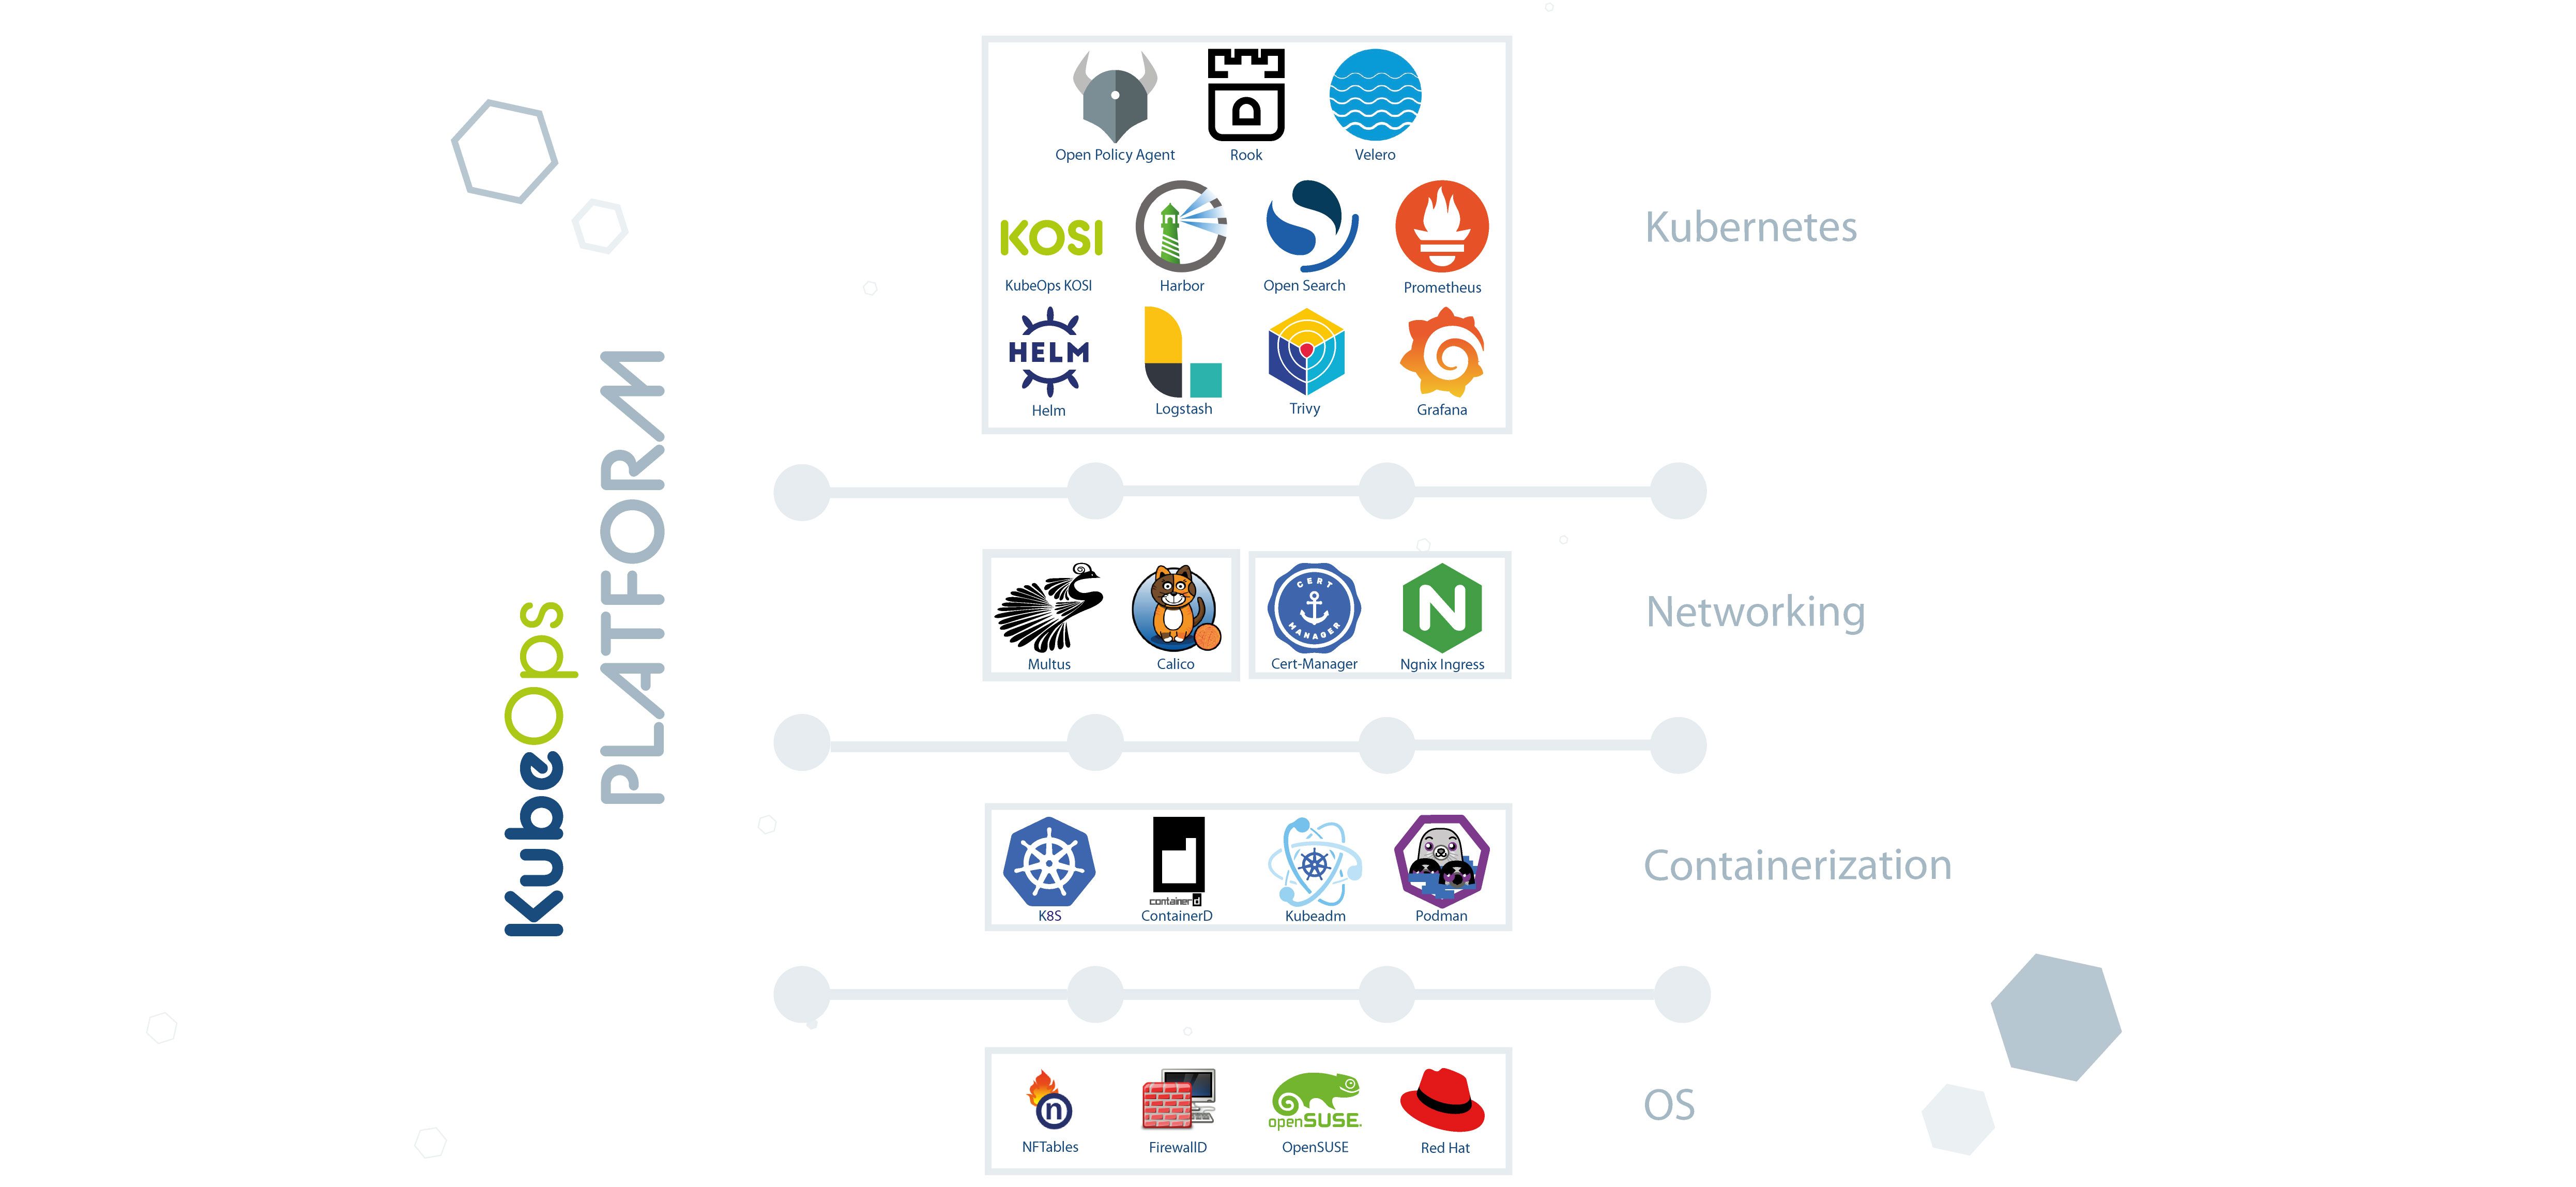 The image is a diagram of the "KubeOps Platform" featuring a collection of logos representing various technologies and tools categorized under "Kubernetes", "Networking", "Containerization", and "OS" (Operating System). Each category is delineated by its own row with a colored stripe background where the logos of corresponding tools are placed. The logos symbolize a range of open-source projects and products commonly used in Kubernetes ecosystems, such as Helm, Grafana, Calico, Containerd, and operating systems like openSUSE and Red Hat. The layout is clean, set against a dark blue background with subtle graphic elements that might suggest a digital network or data structure.